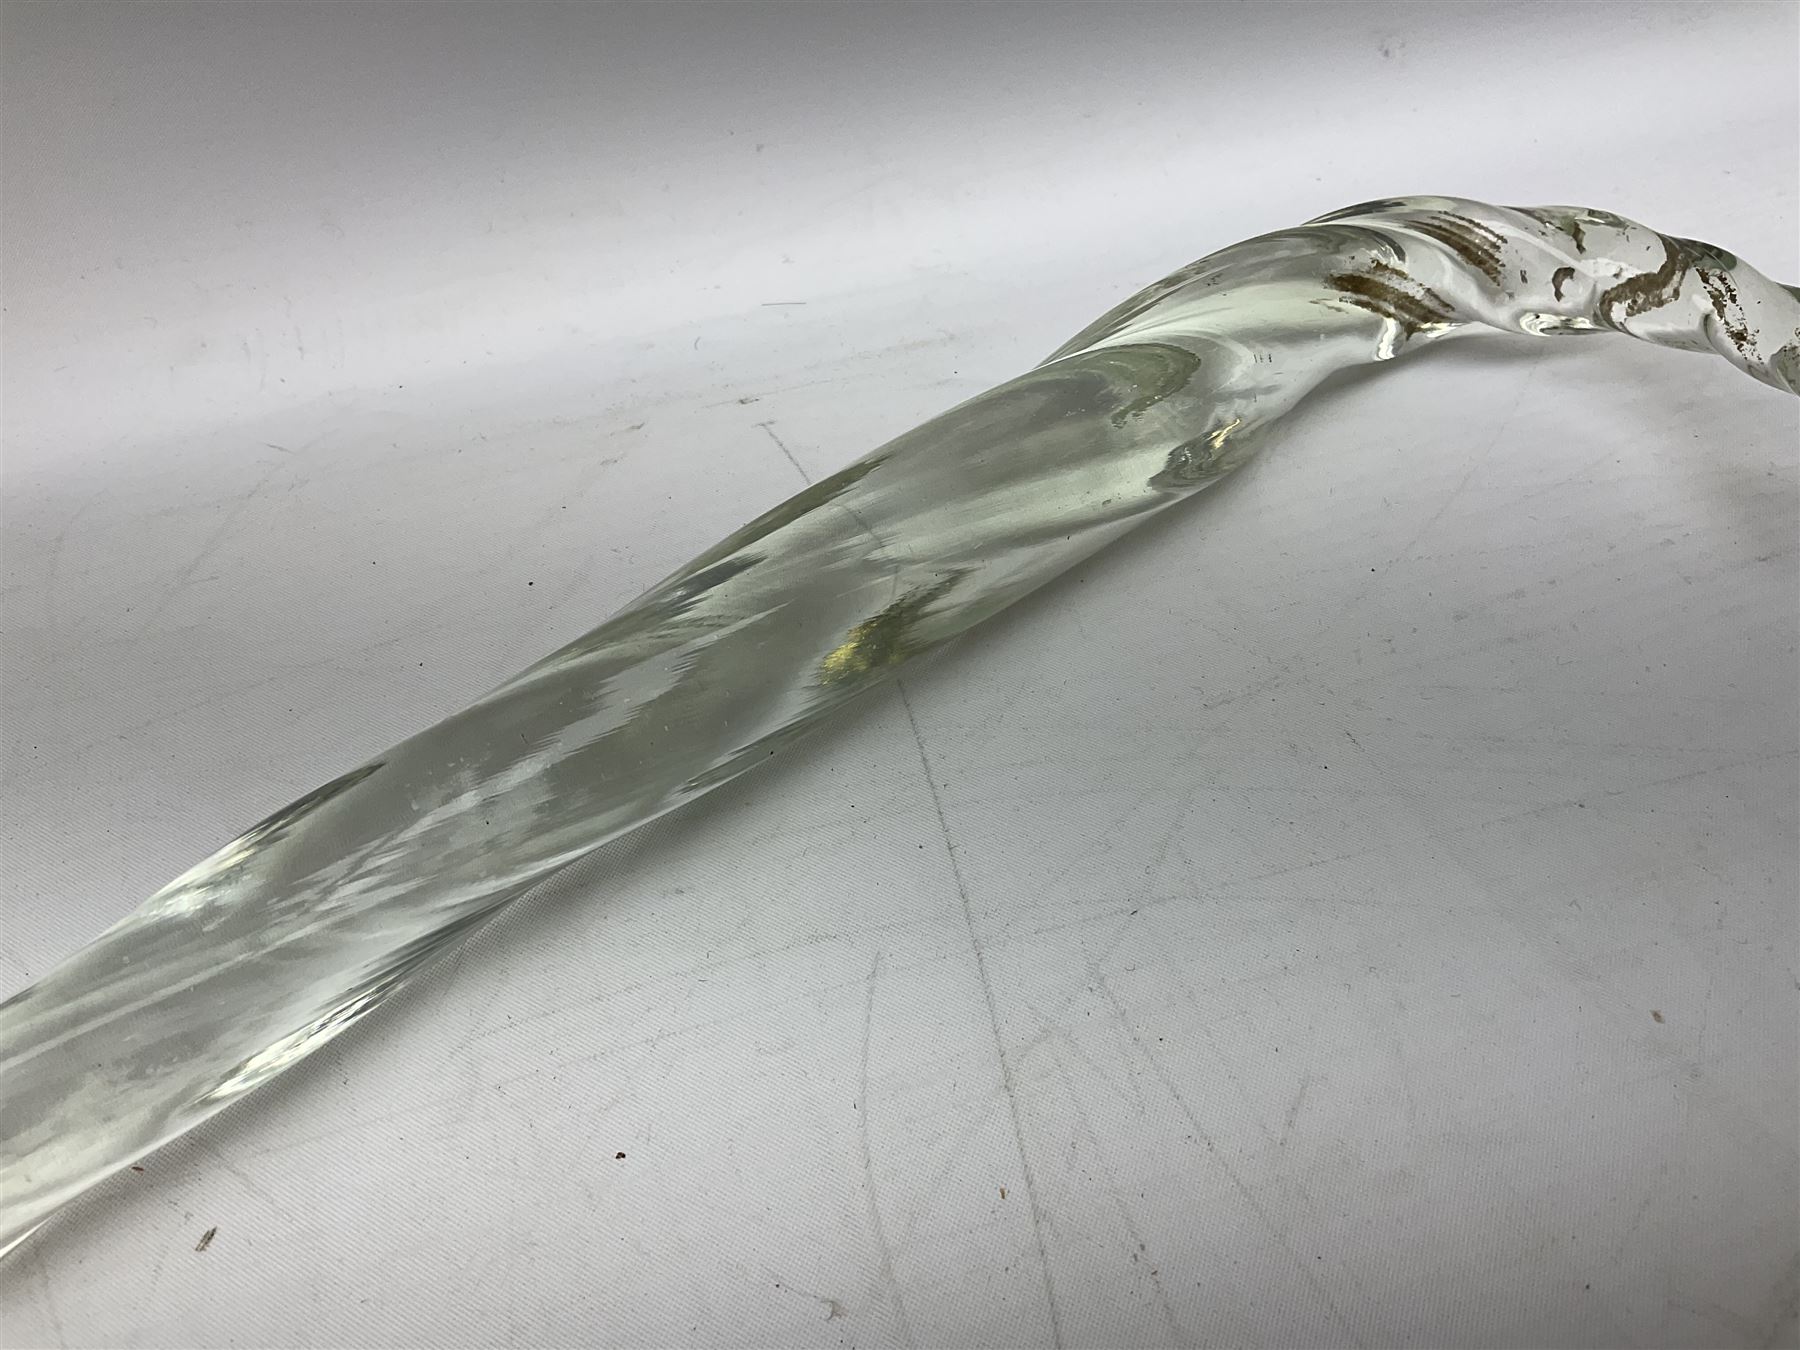 Clear glass frigger cane - Image 5 of 7